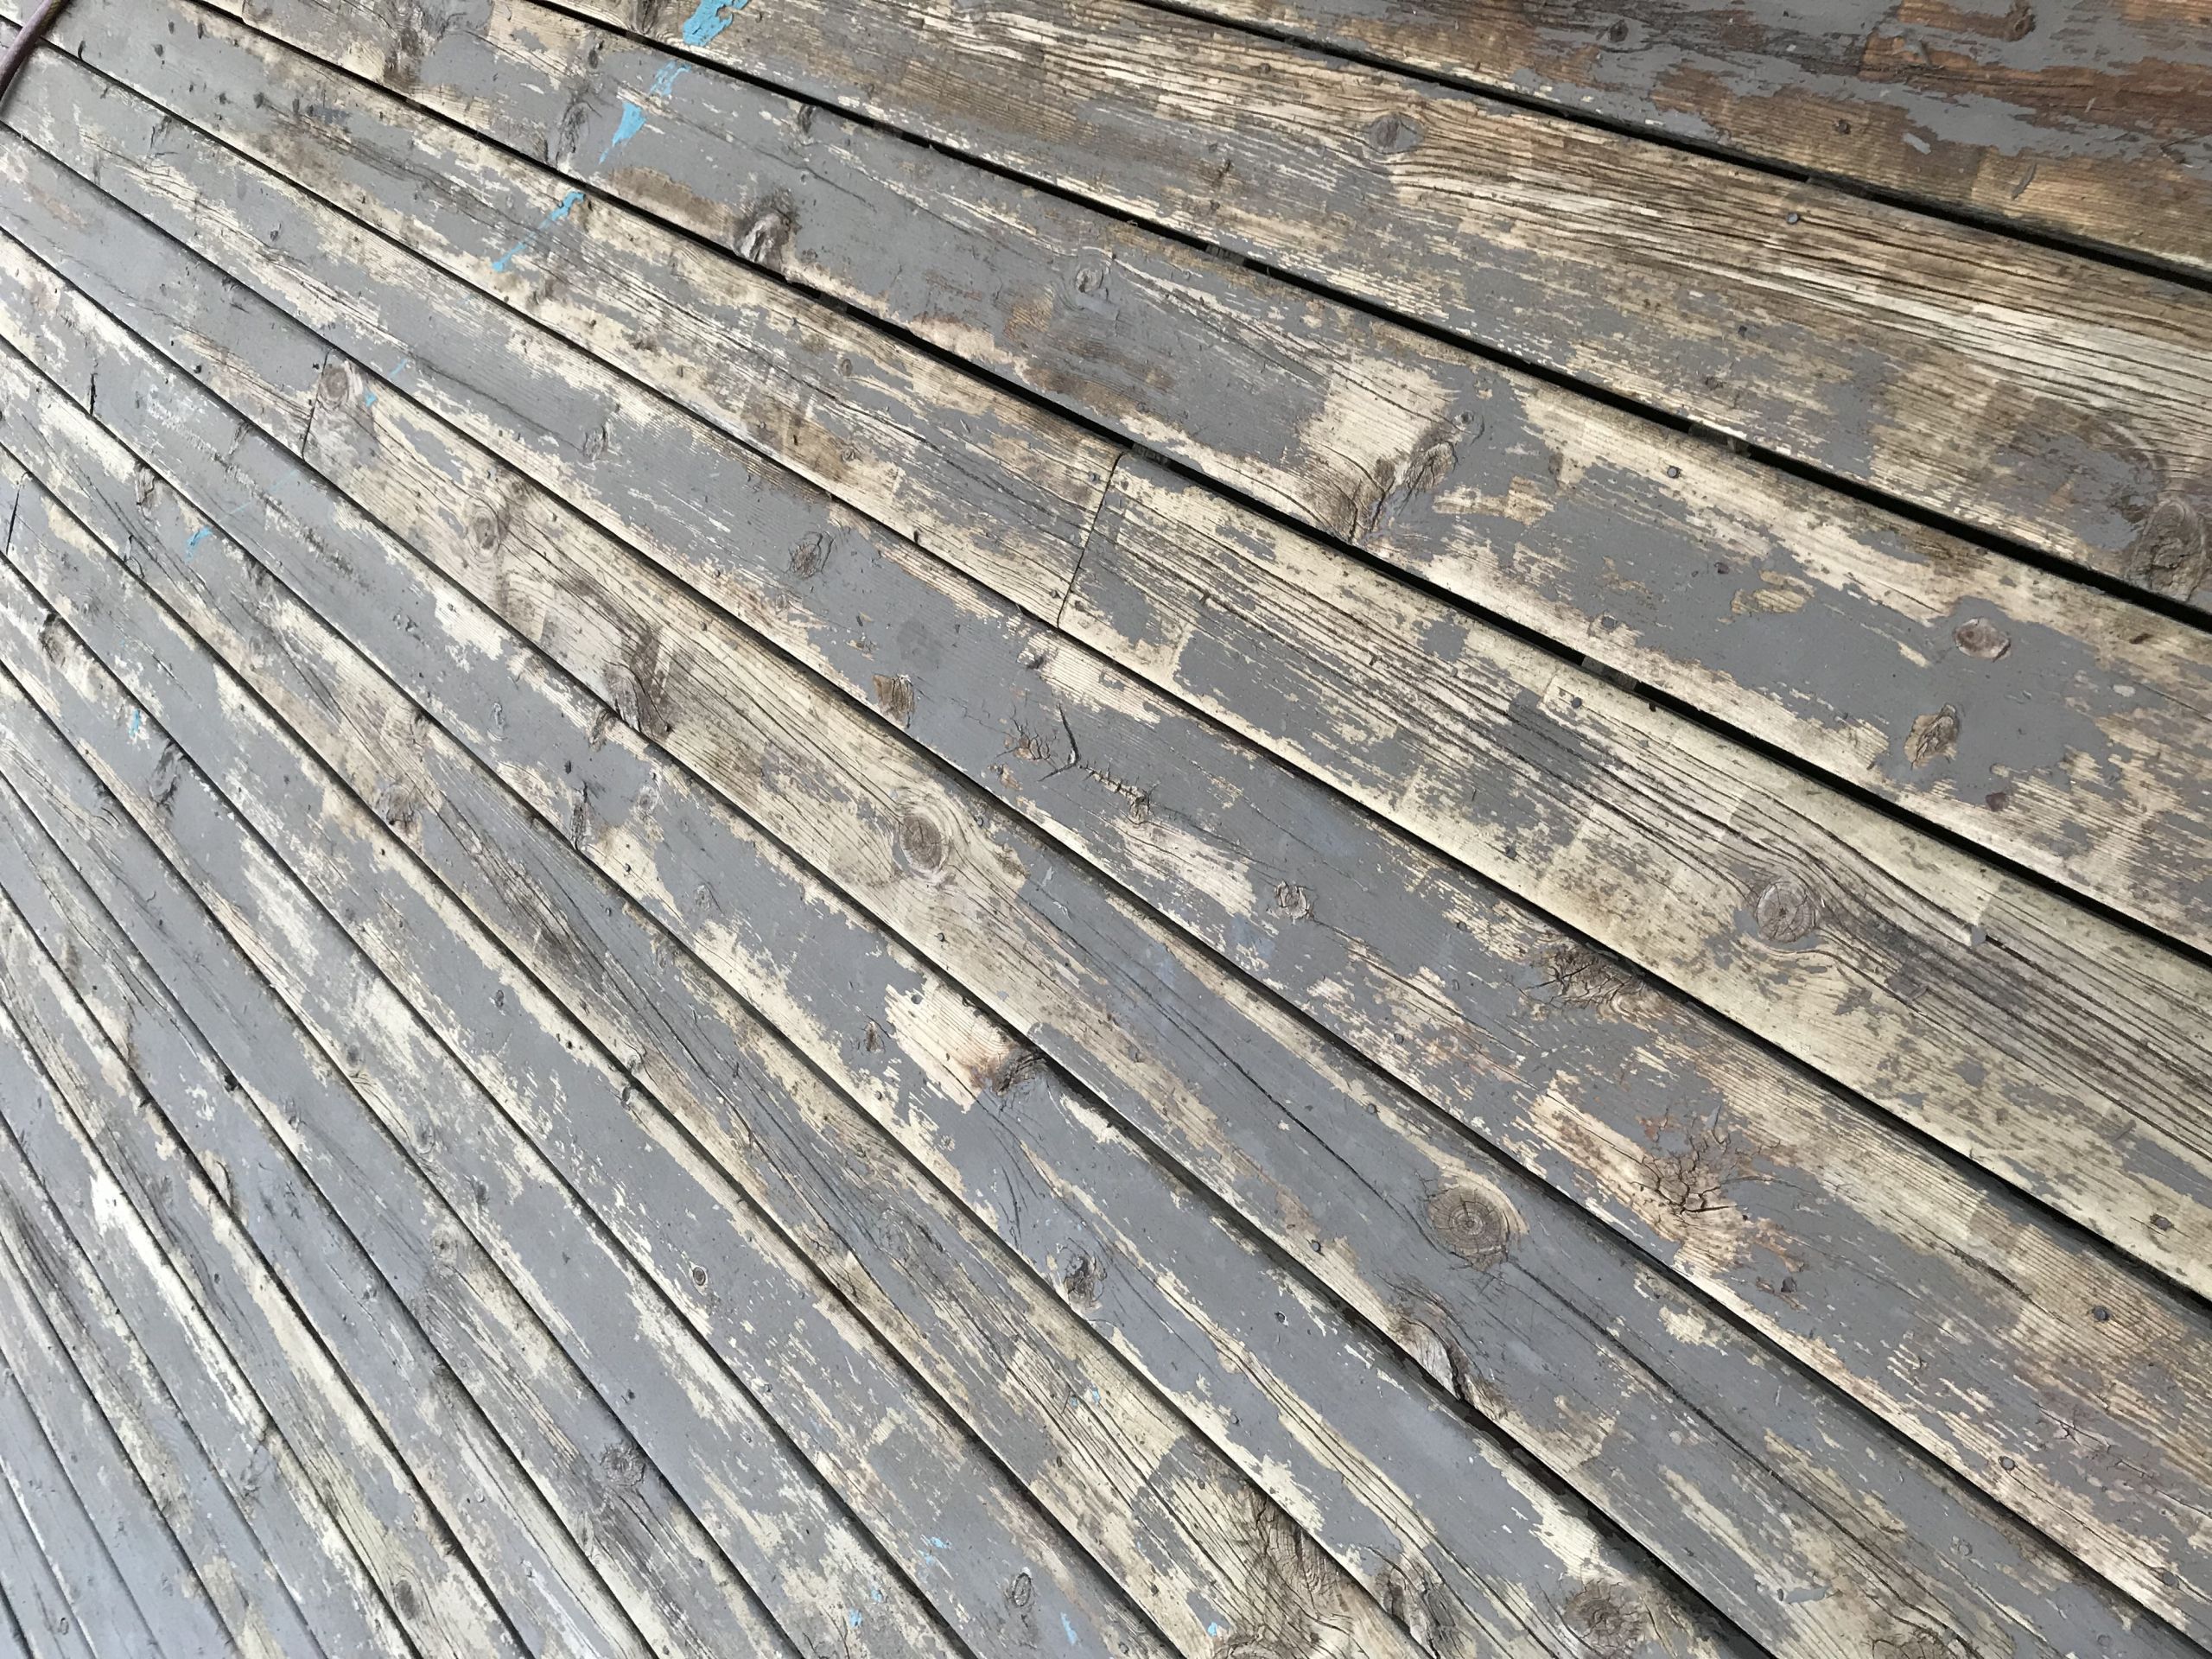 Strip Paint Off Deck
 Deck Stripping – Removing an Old Deck Stain